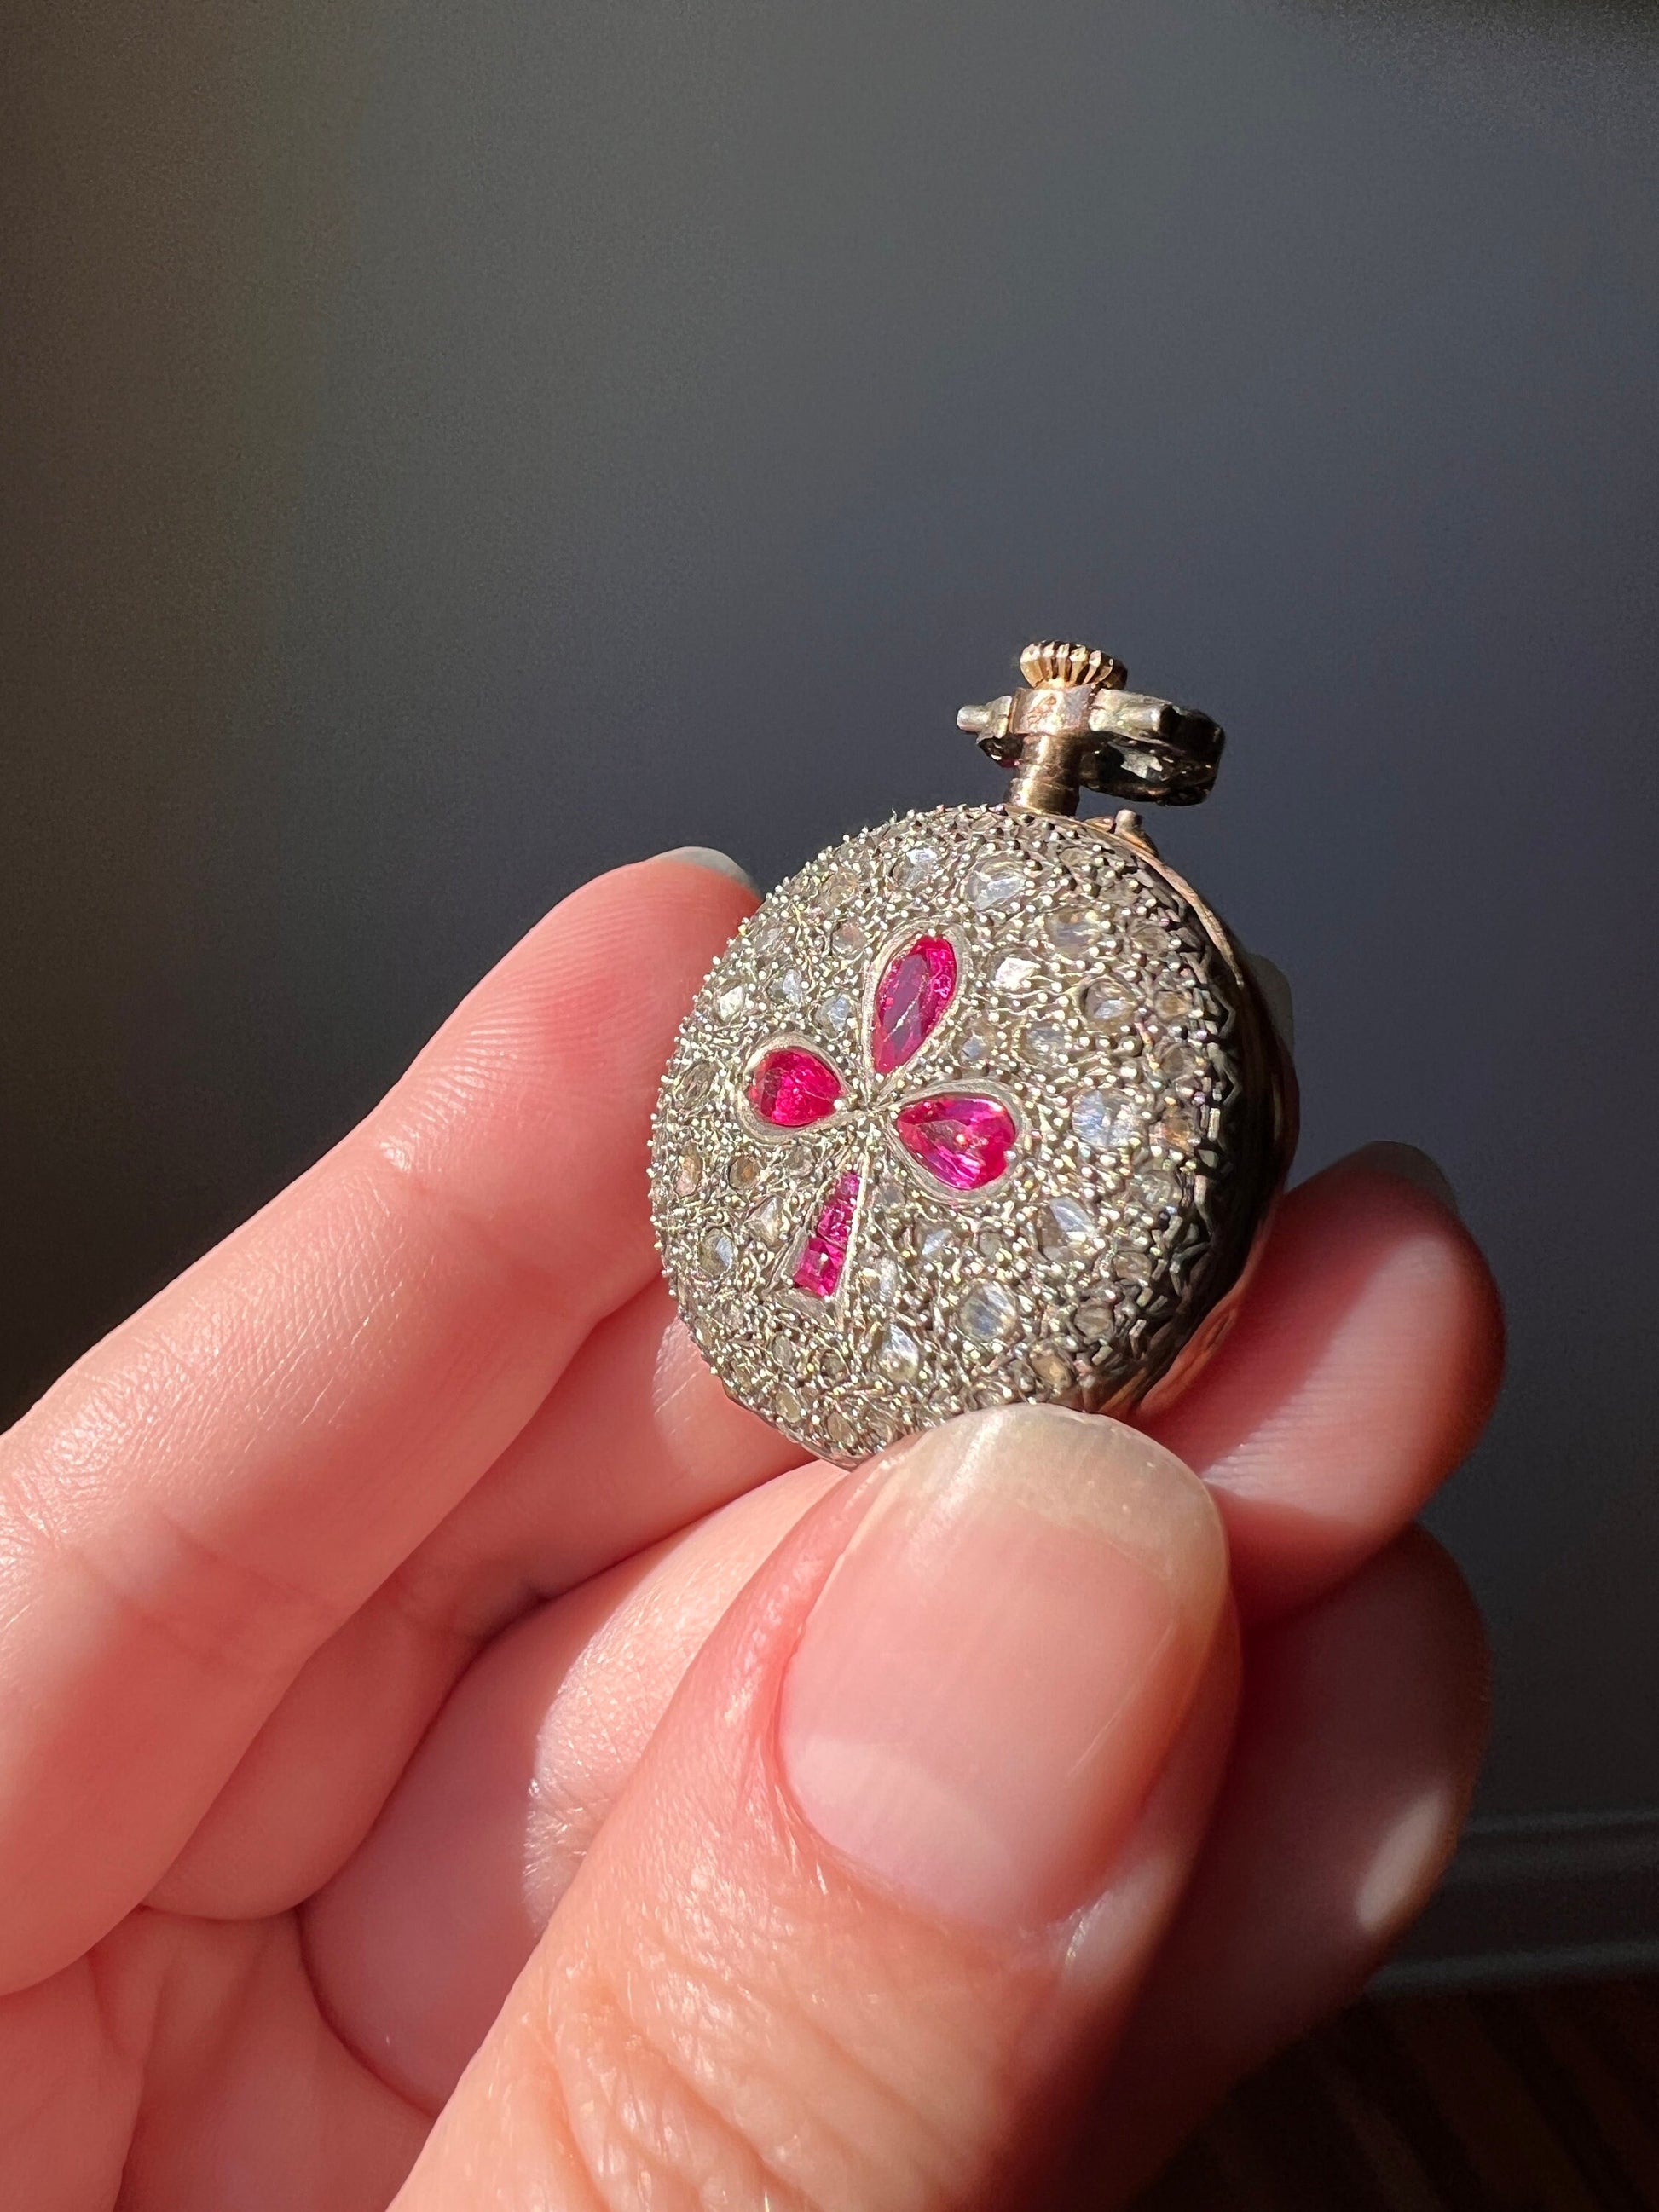 CLOVER Pink Ruby Rose Cut DIAMOND Encrusted French Antique 18k Gold Silver Pocket Watch Case Pendant Rare Victorian Figural Good Luck Gift